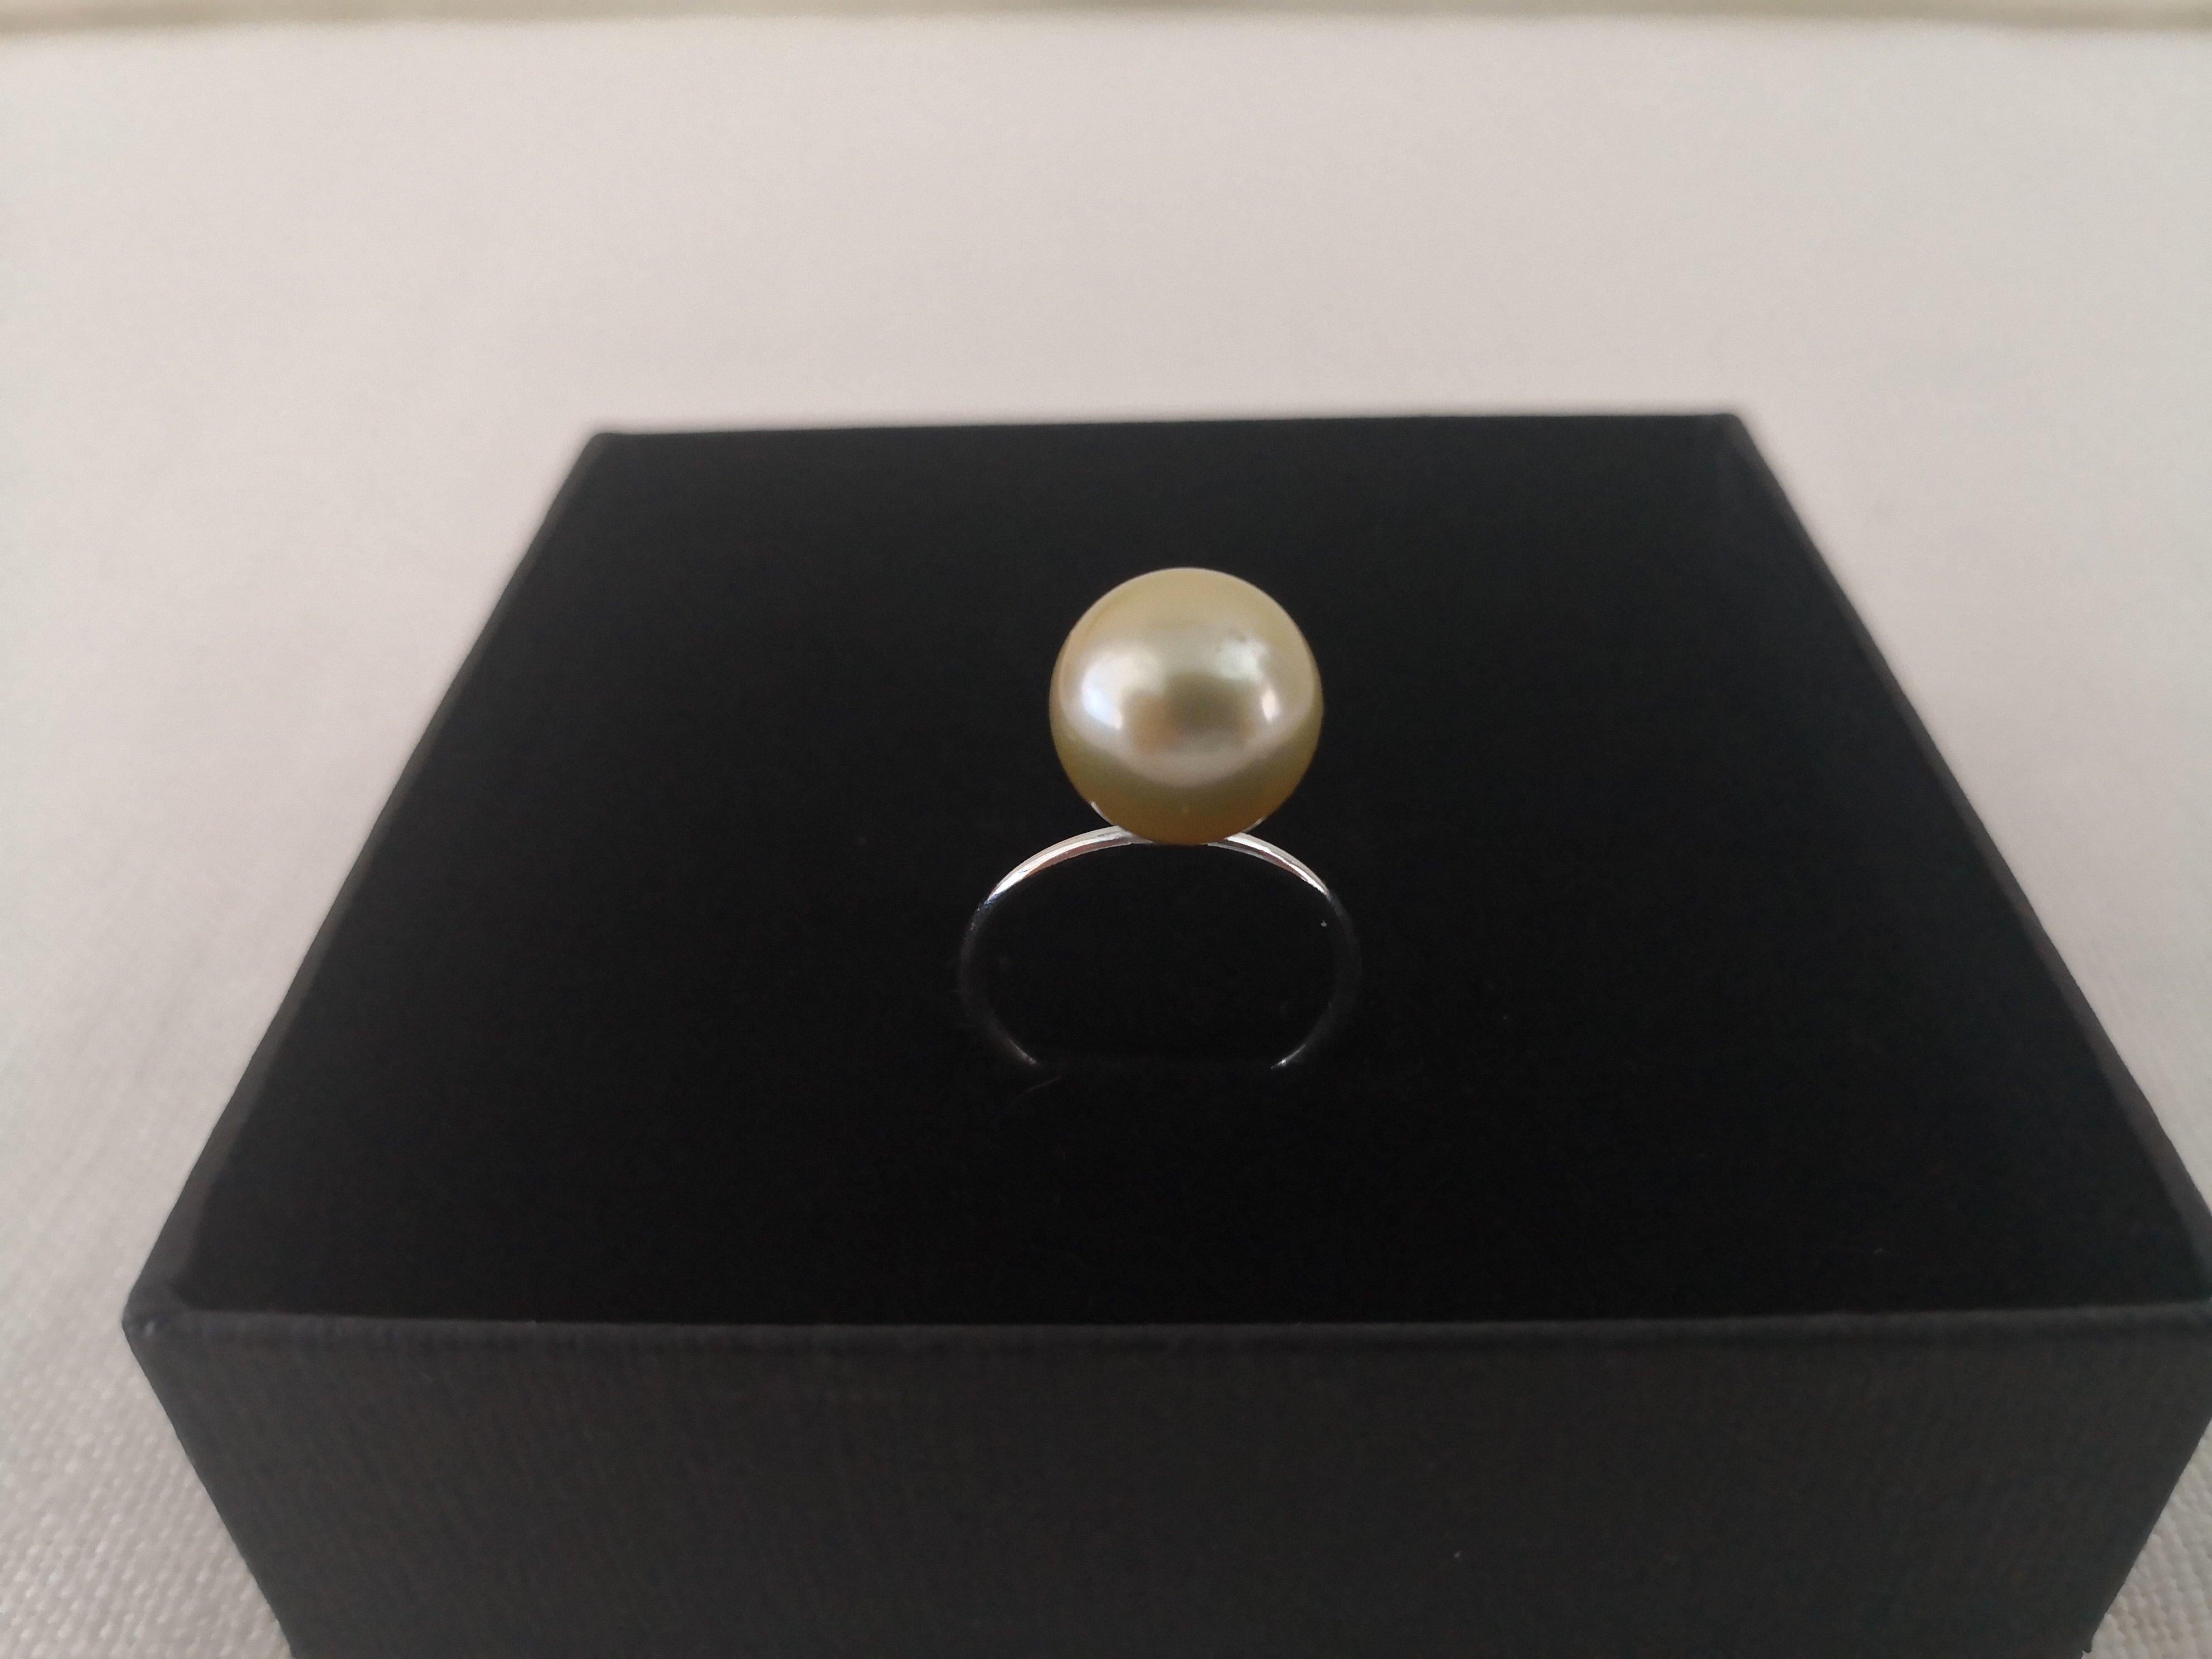 A Ring of a beautiful Golden Color South Sea Pearl and manufactured in Silver 925 mls.

- Size of Pearl 12 mm

- Shape: Round

- Origin of Pearl: Pinctada Maxima Oyster

- Area: Indonesia Ocean Waters

- Color: Pearl of Golden Natural Color

-